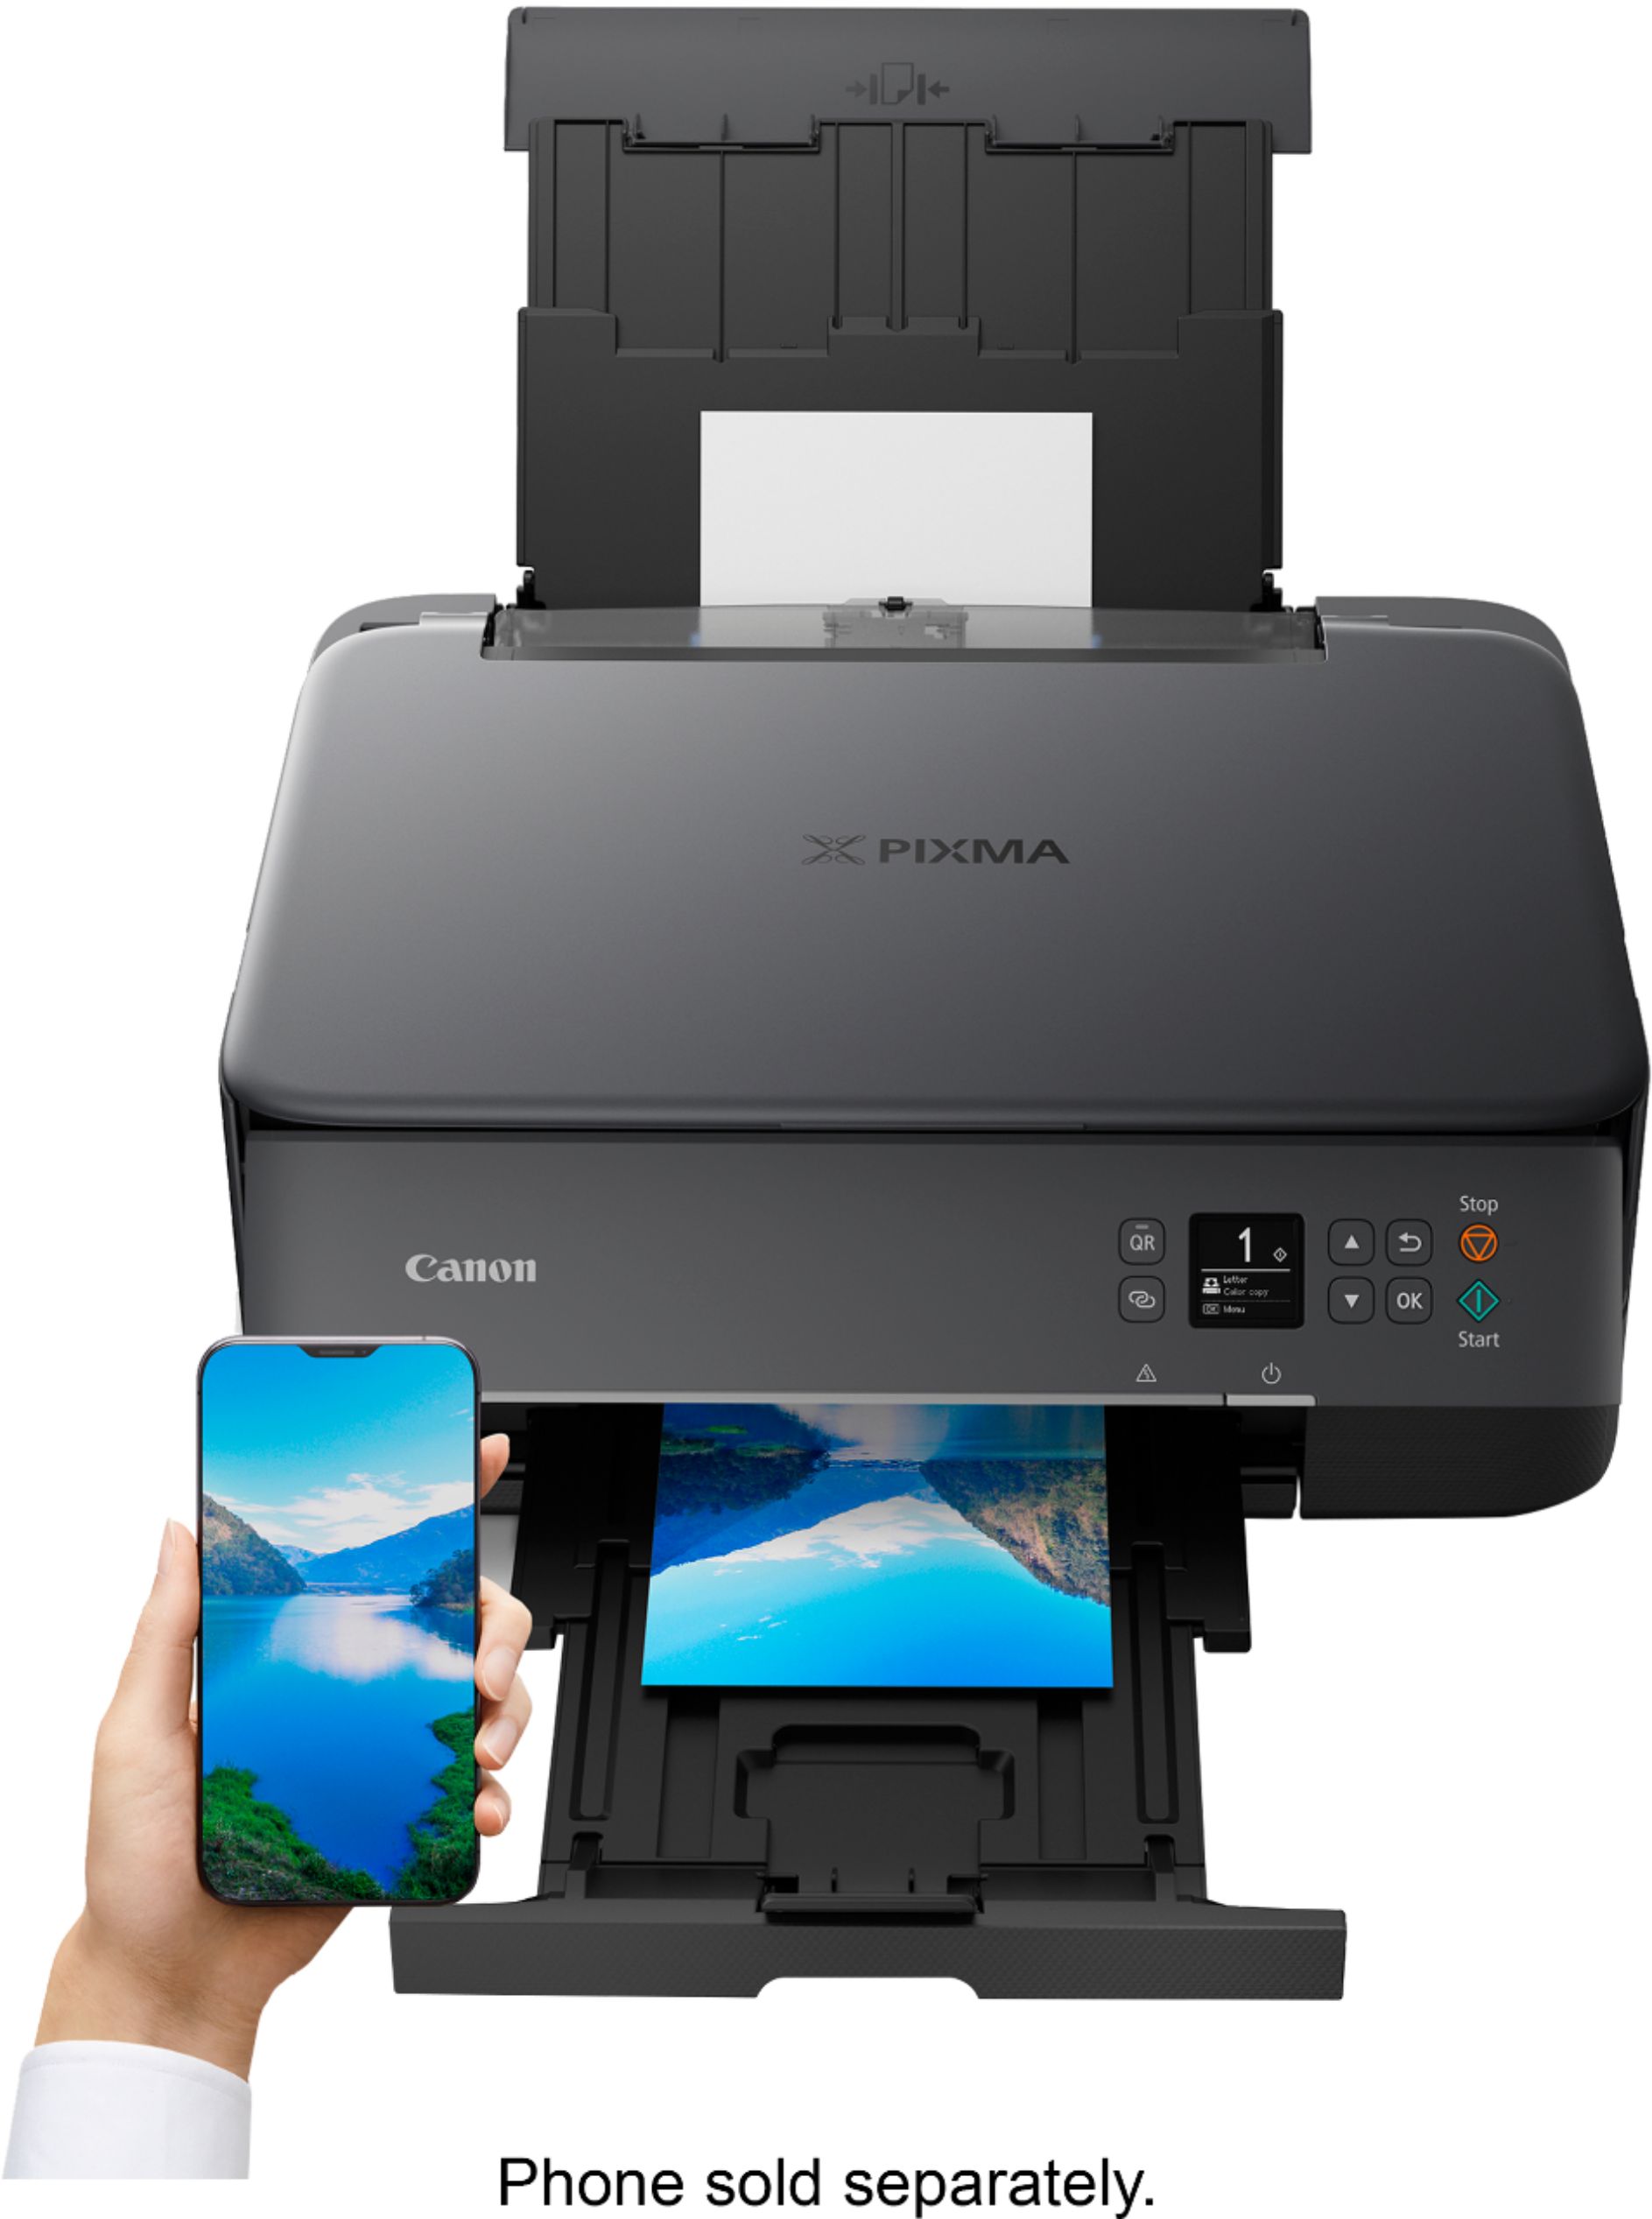 Canon Pixma TS6420 Wireless Inkjet All-In-One Printer Review